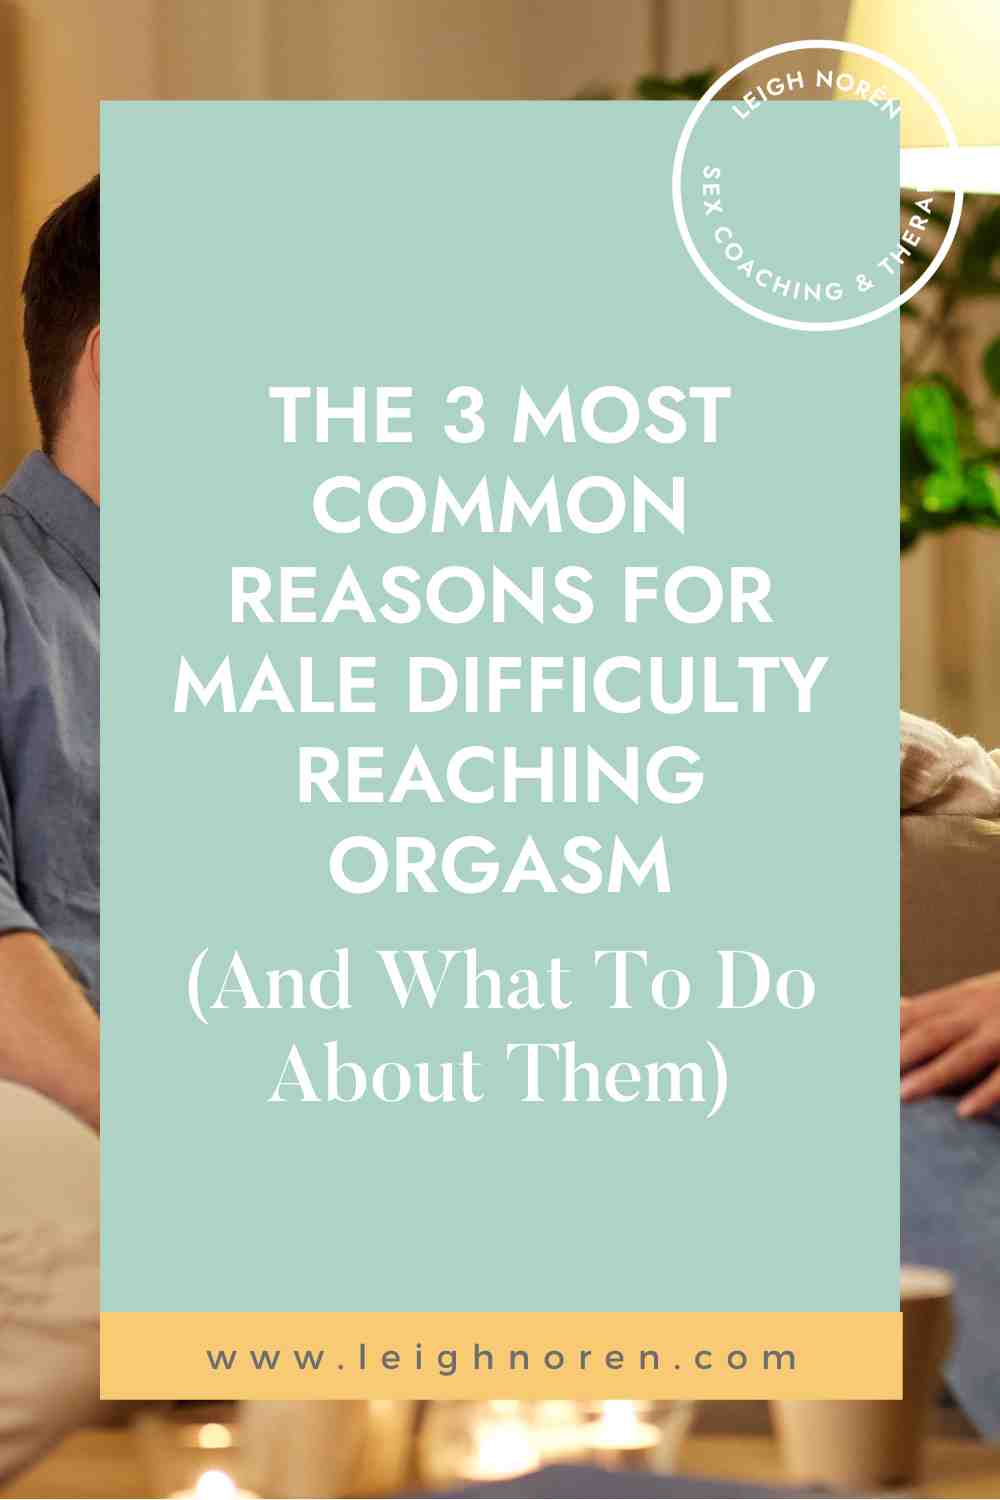 The 3 Most Common Reasons For Male Difficulty Reaching Orgasm (And What To Do About Them)